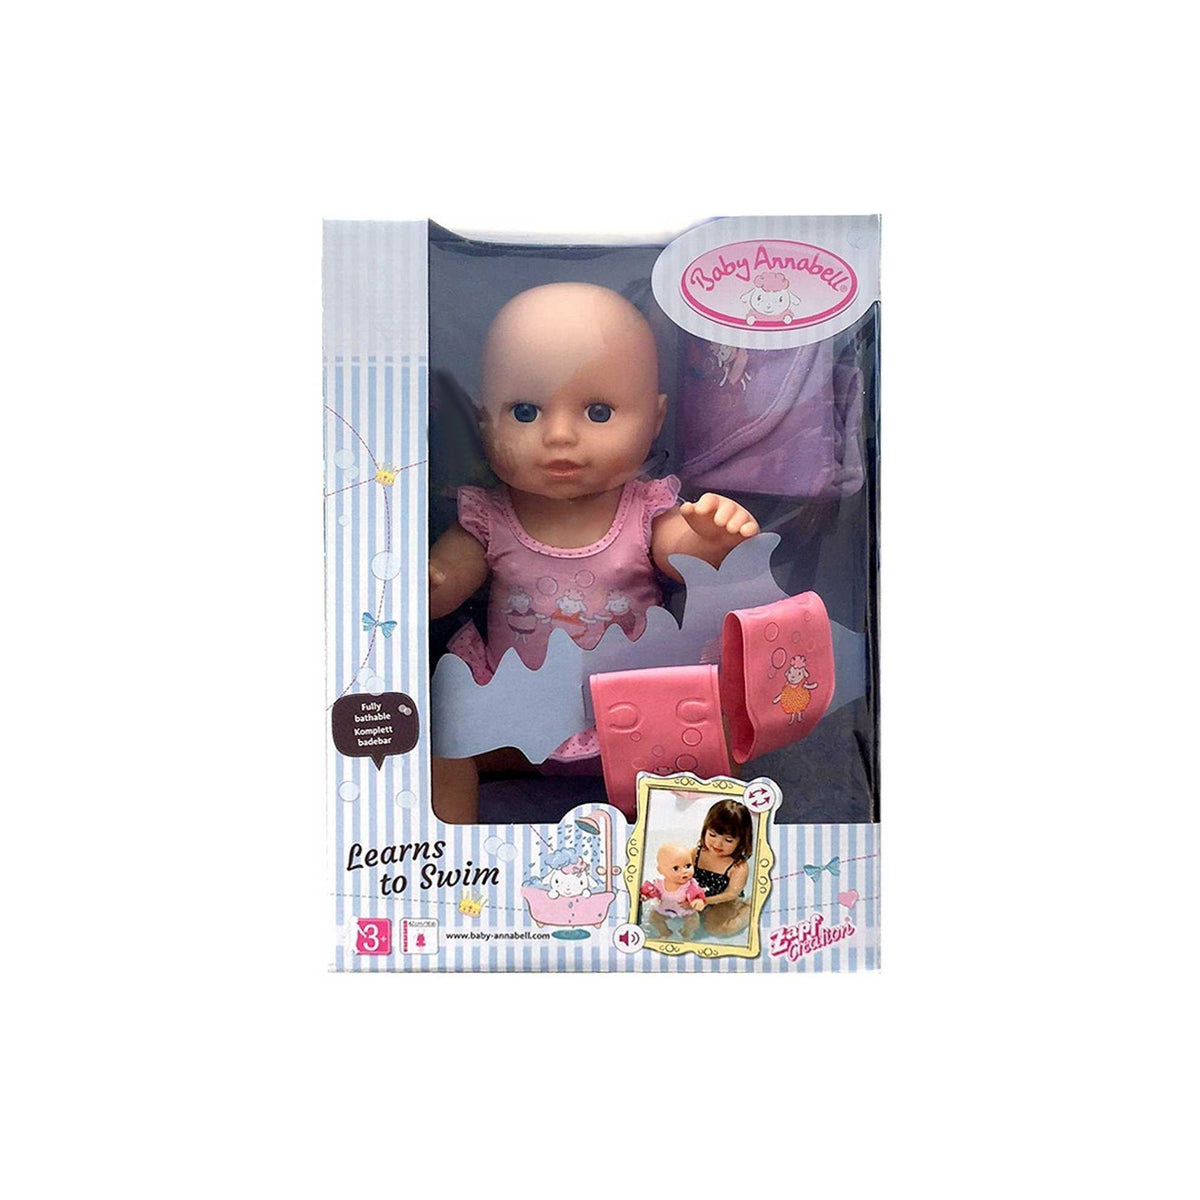 Baby Annabell Learns To Swim Doll